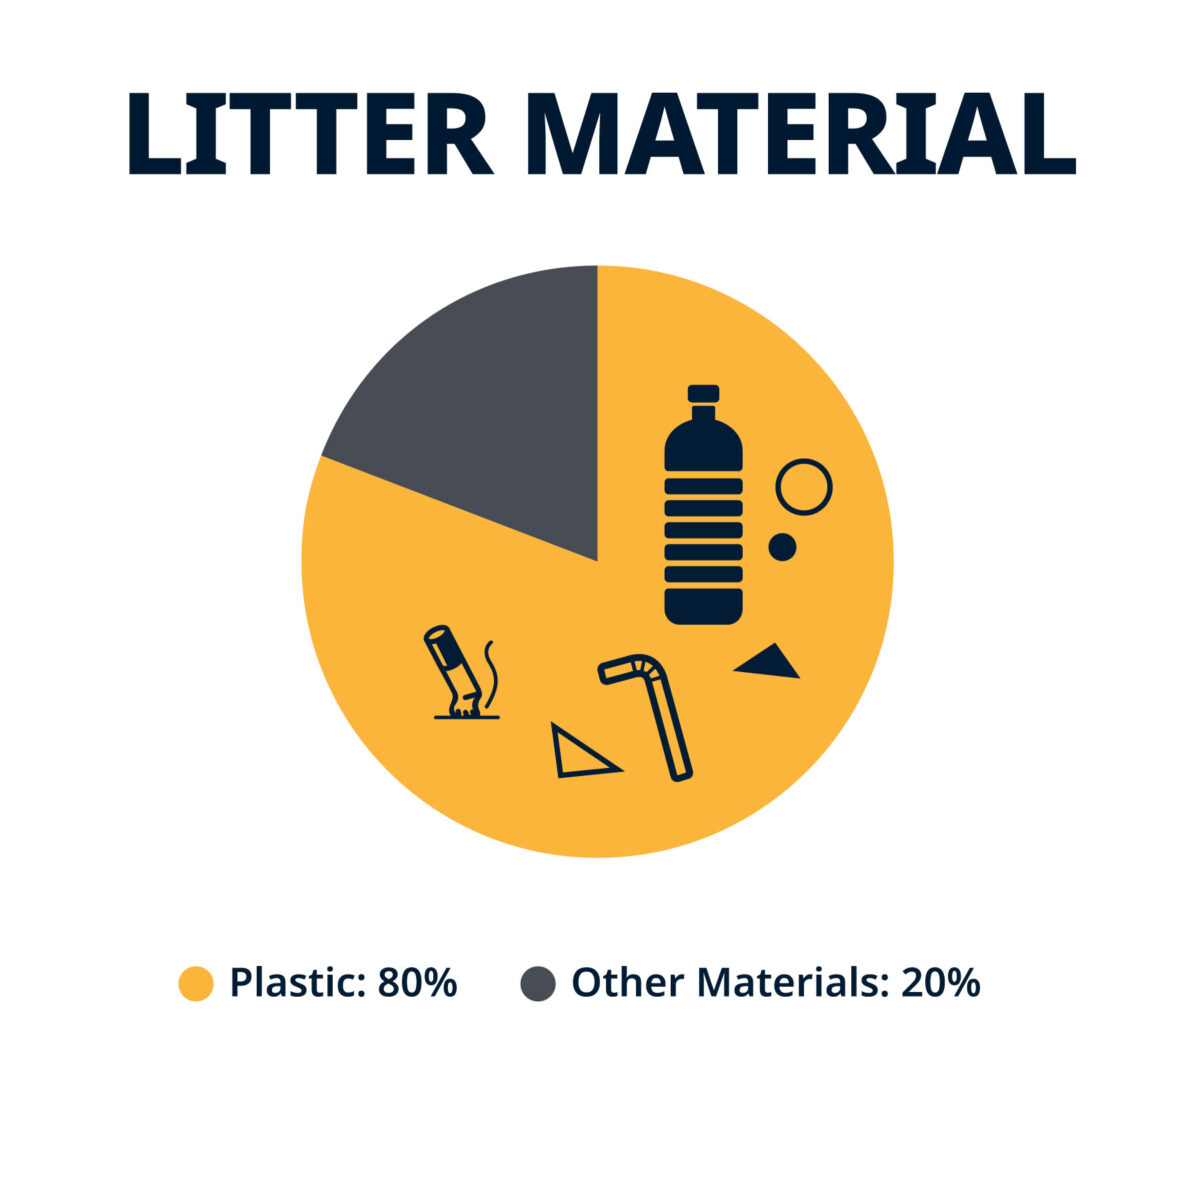 Litter Material: 80% plastic, 20% other materials.